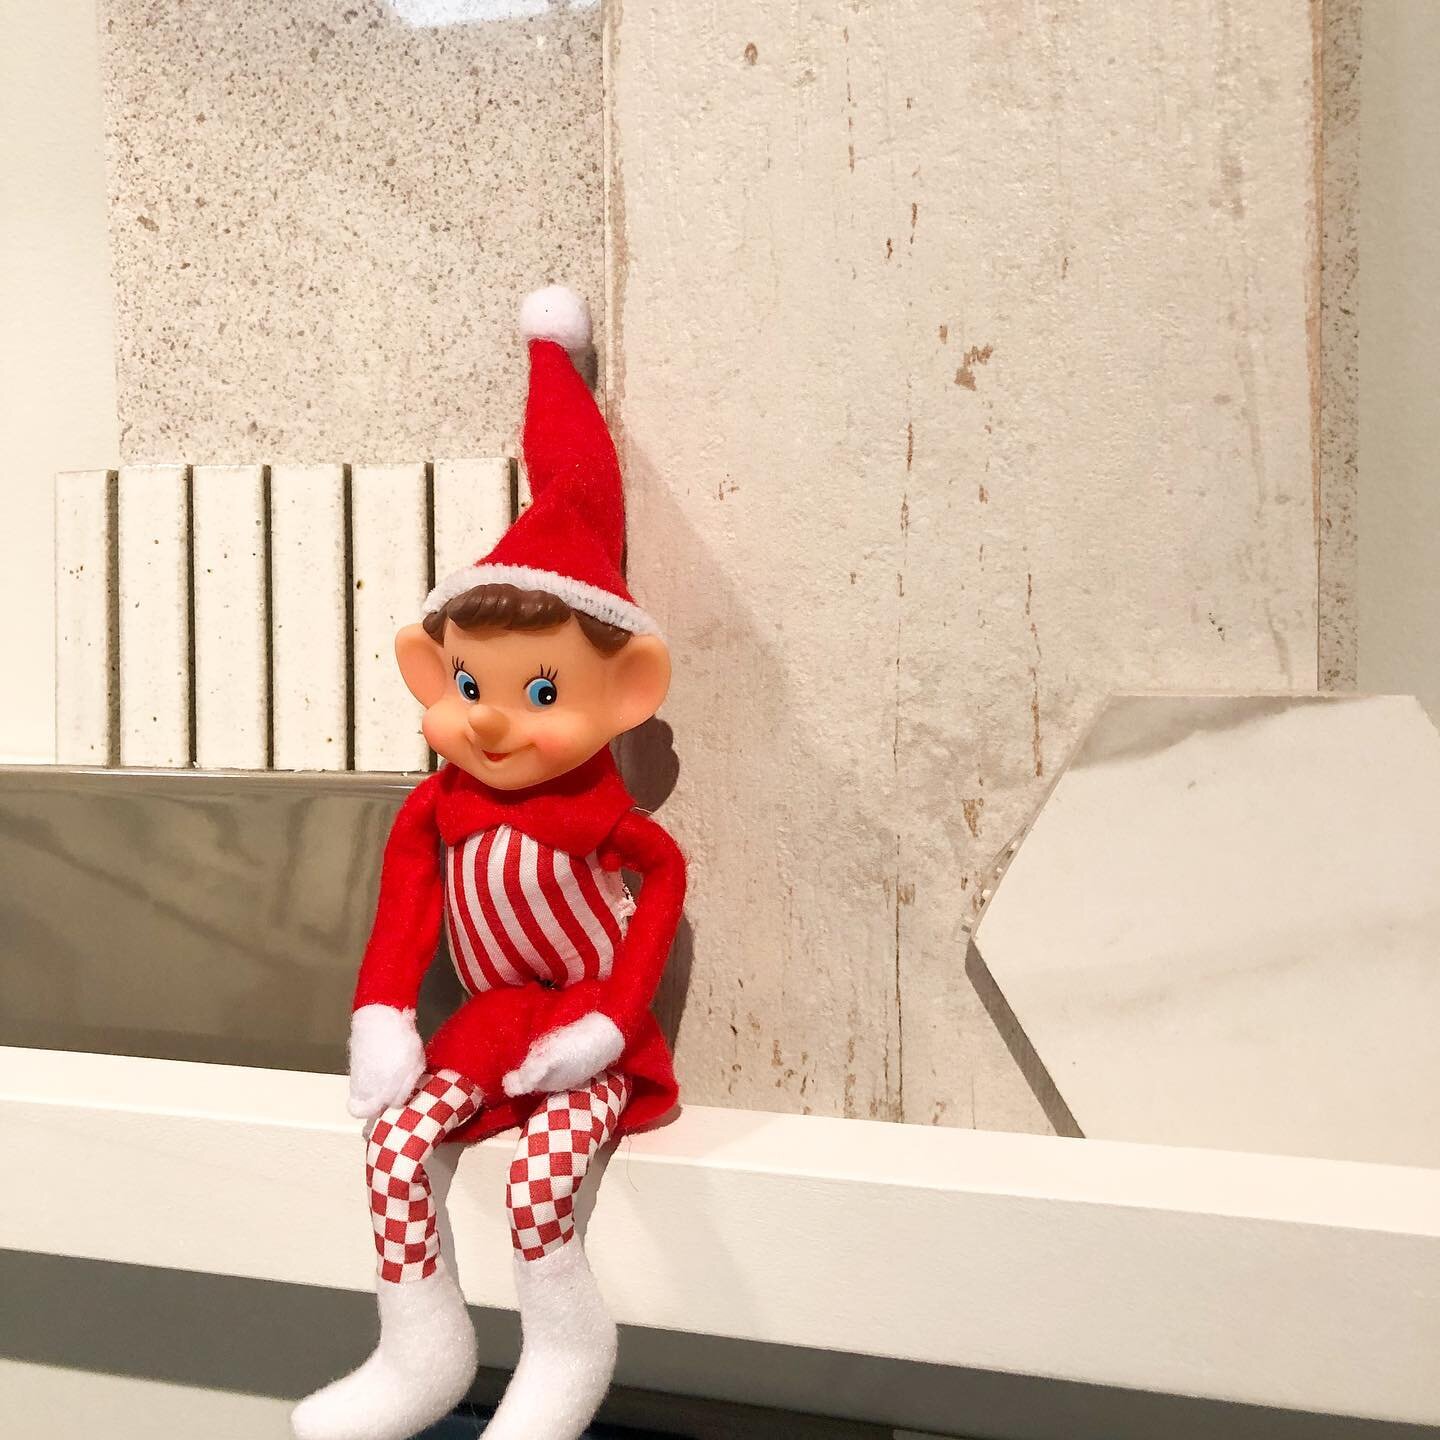 Here&rsquo;s your elf on the shelf morning reminder &mdash;&mdash; This morning our elf is hanging out by our Crossville subway tile &amp; Soli Asuka stacked mosaic 🎄